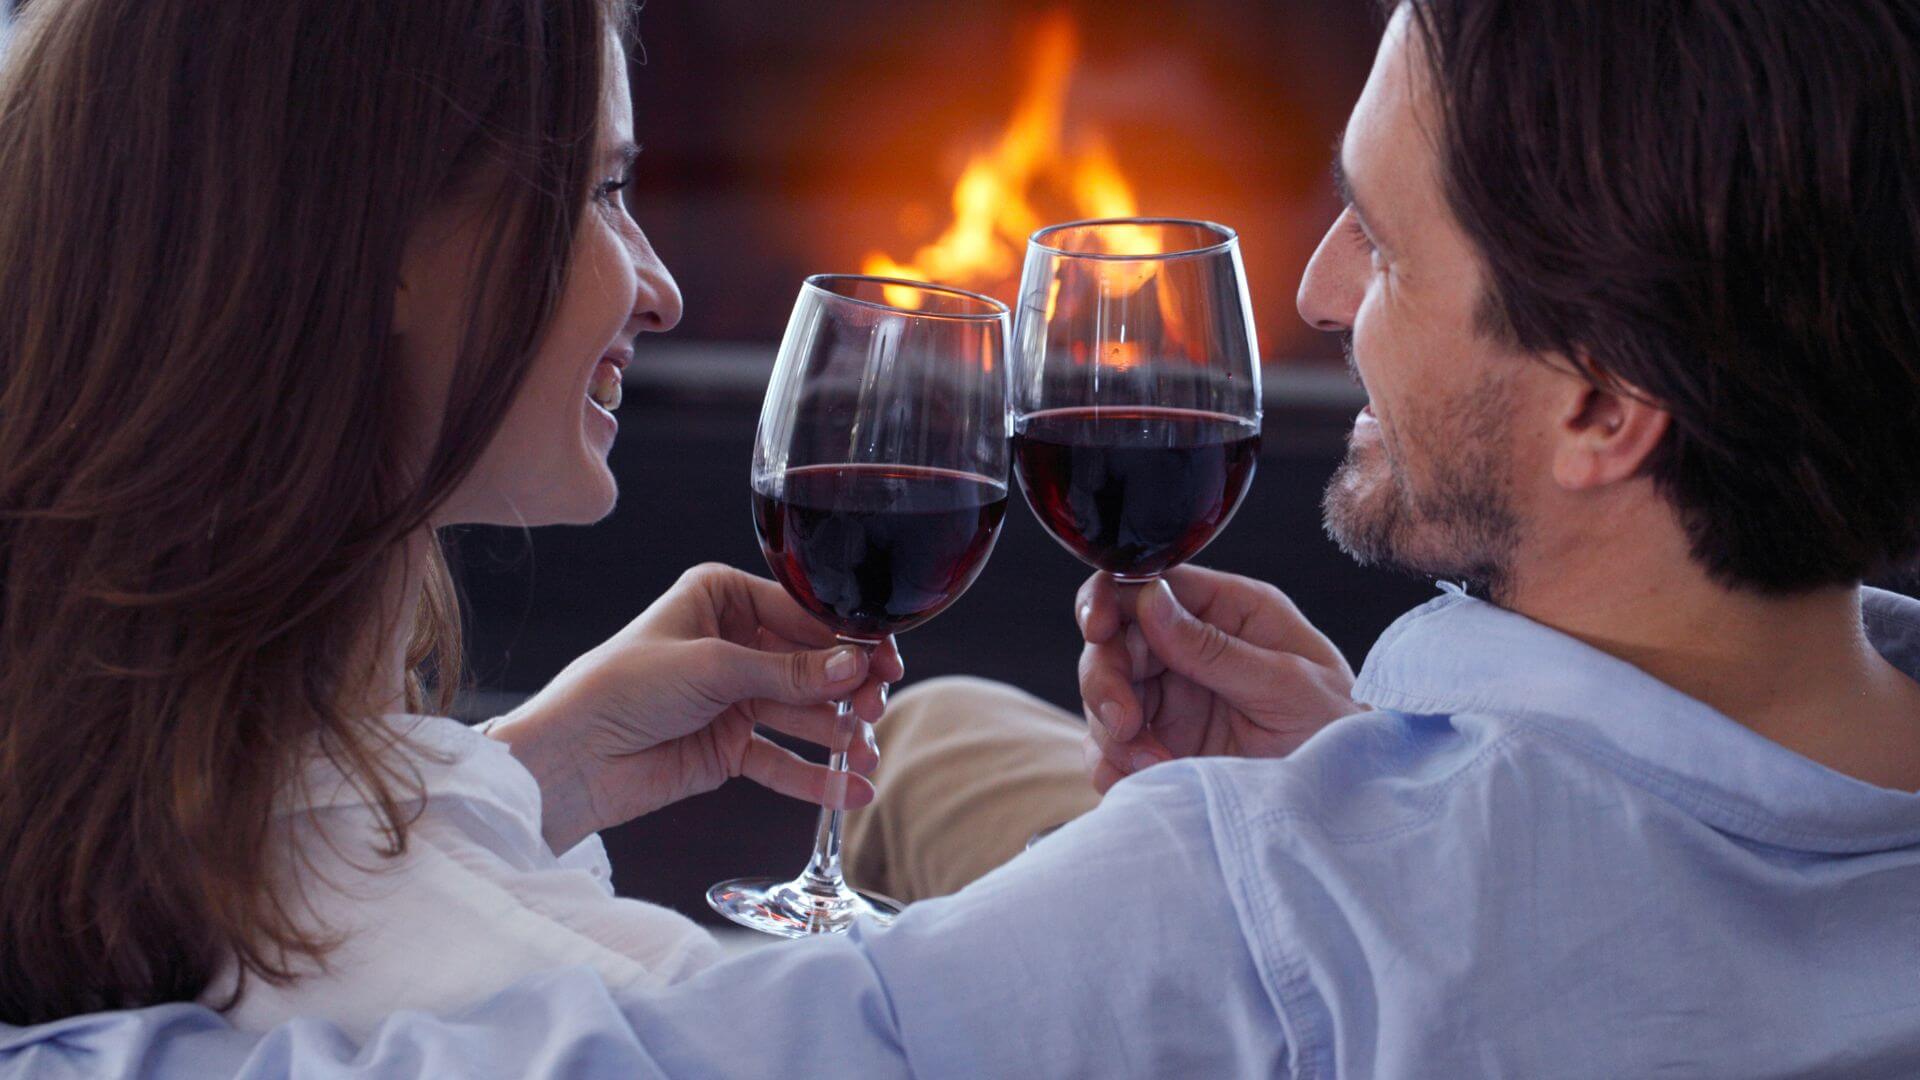 Smiling couple sitting in front of burning fireplace clinking red wine glasses together.